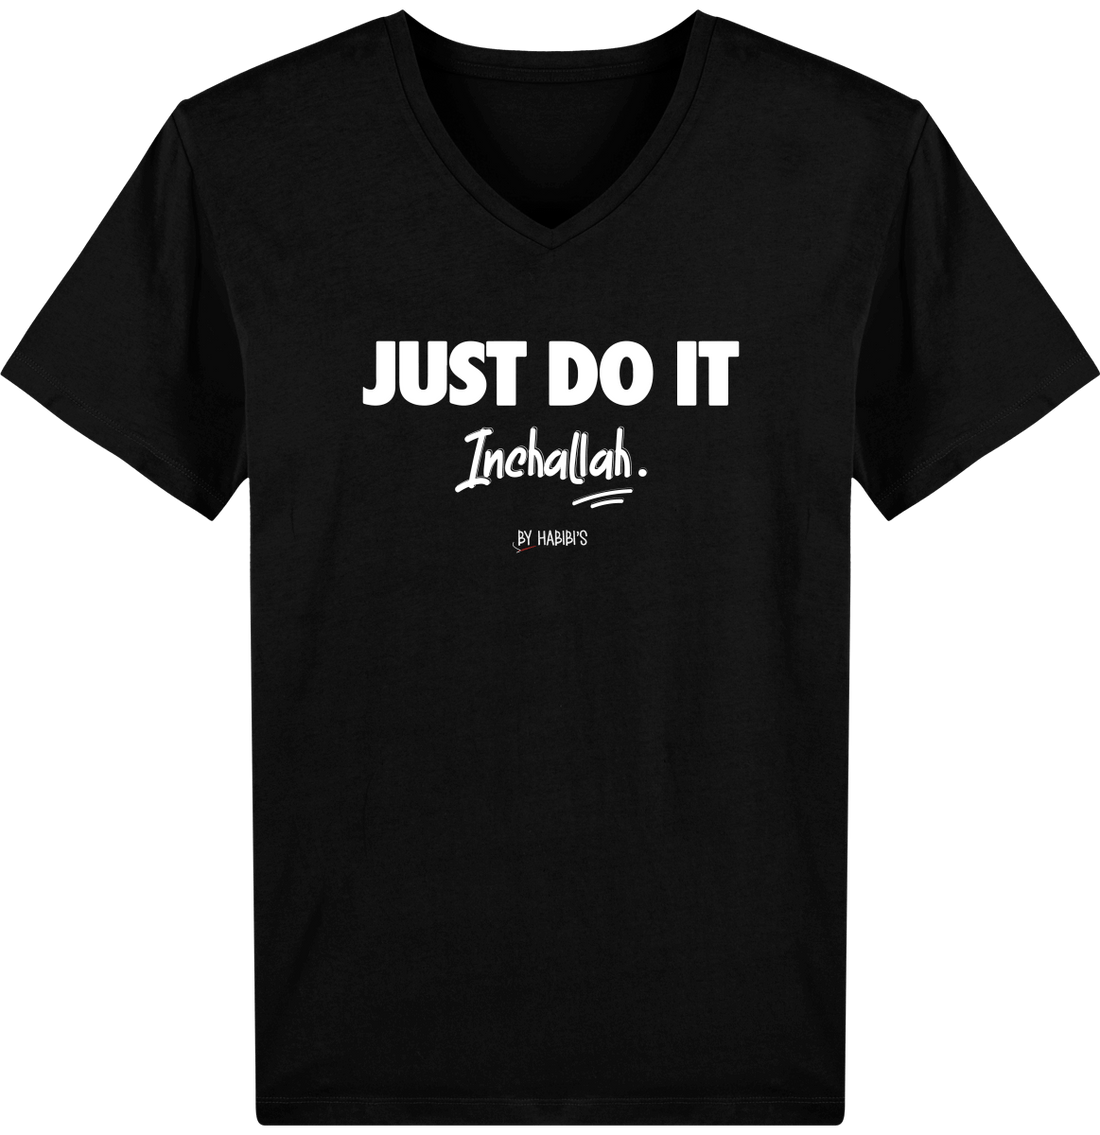 Homme>Tee-shirts - T-Shirt Homme Col V <br> Just Do It Inchallah